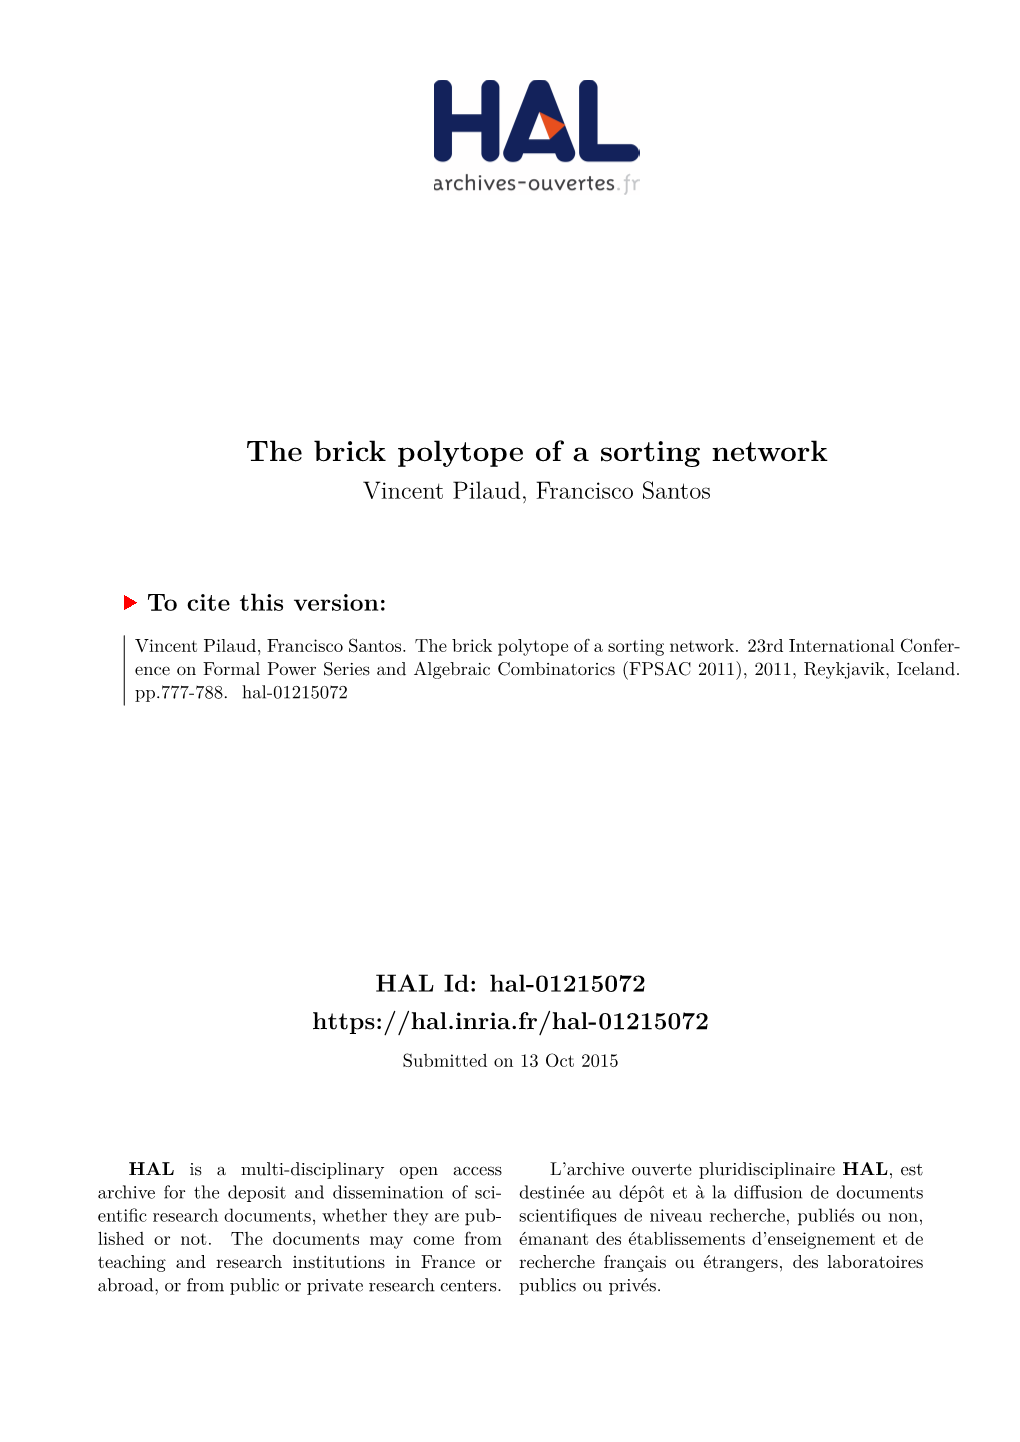 The Brick Polytope of a Sorting Network Vincent Pilaud, Francisco Santos